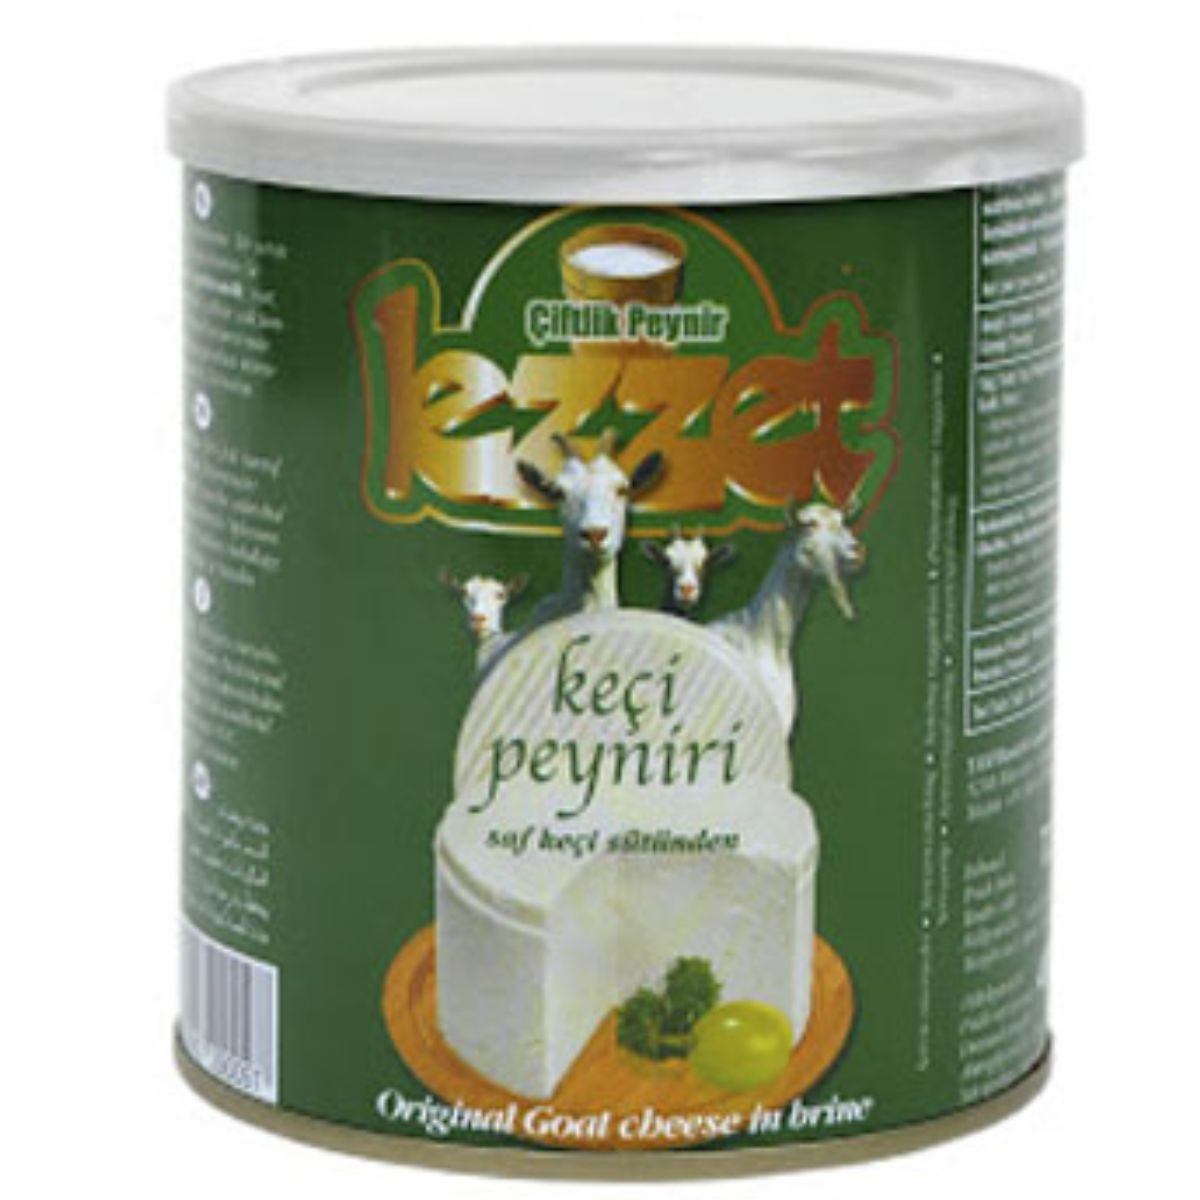 A can of Lezzet - Goat Cheese - 400g with a label.